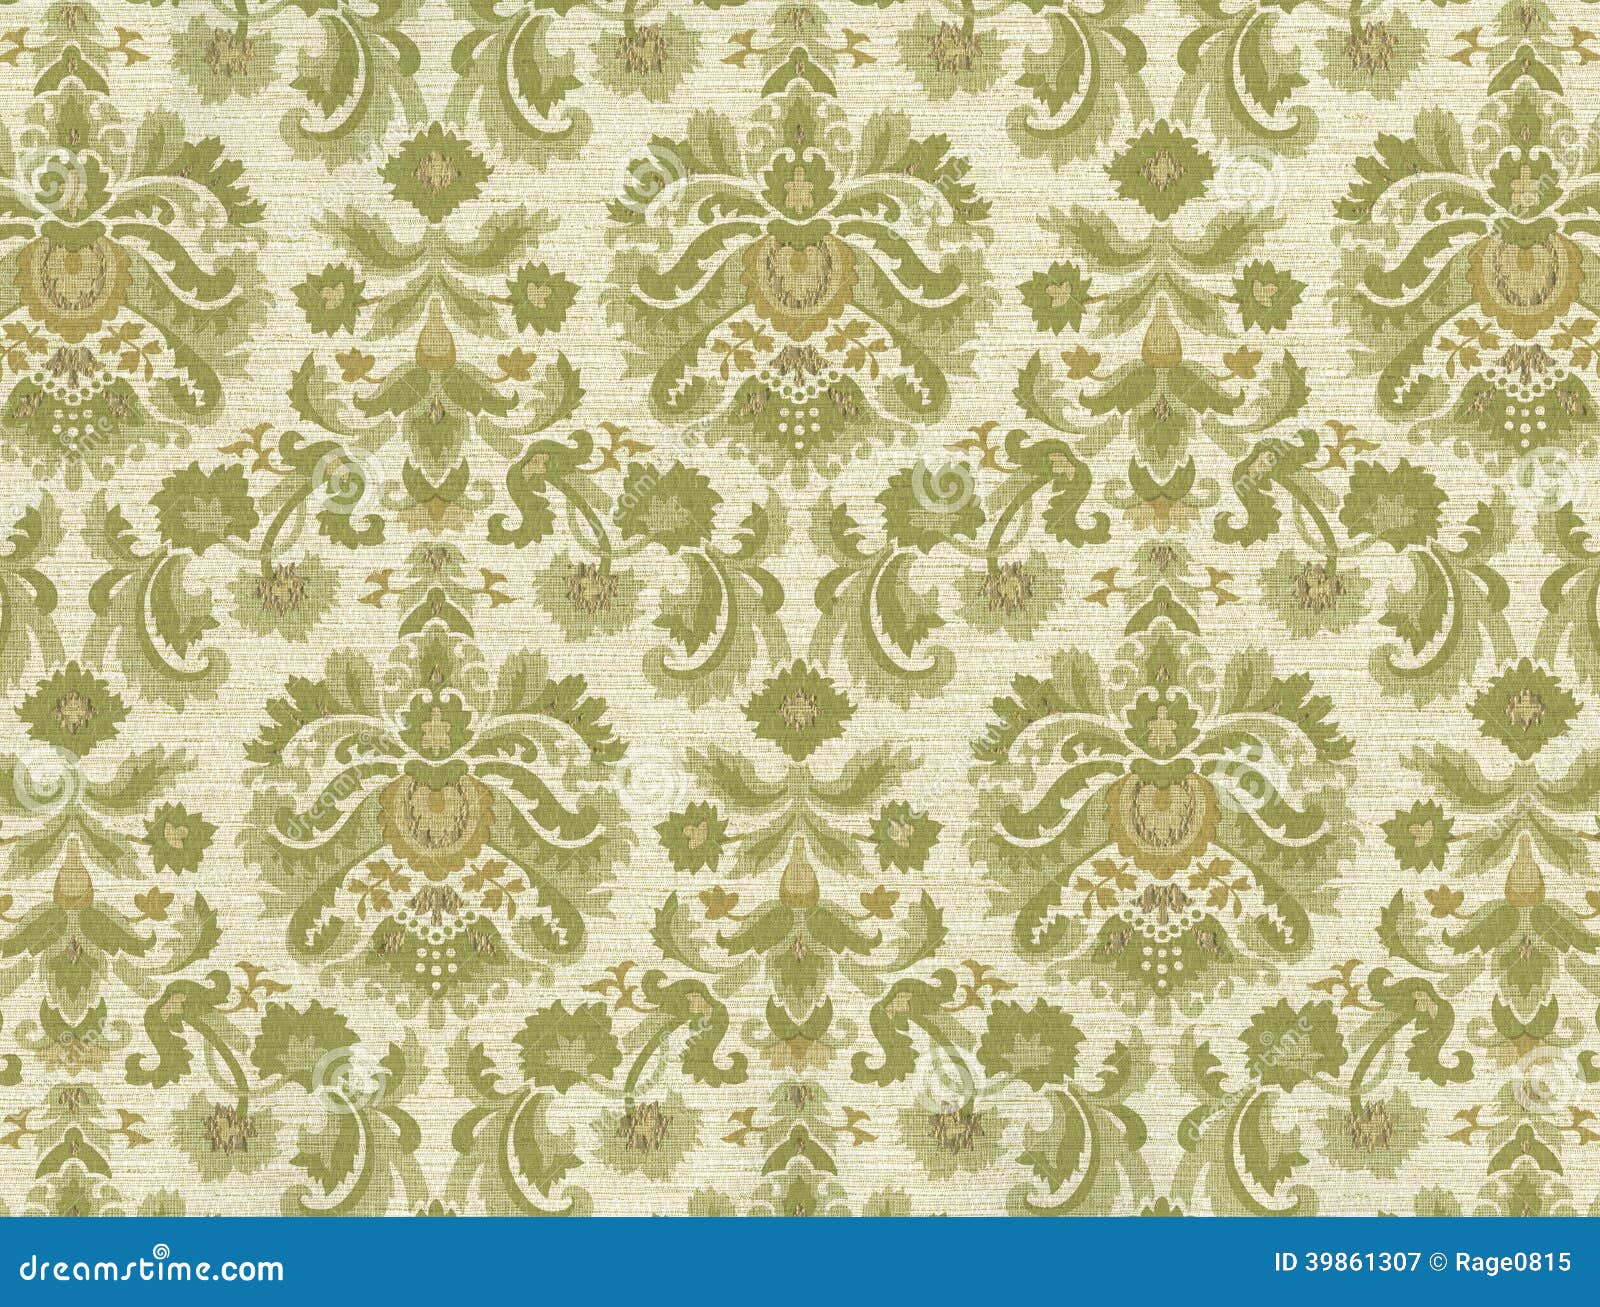 High Resolution Antique Wallpaper with Floral Pattern Stock Image - Image  of backgrounds, faded: 39861307